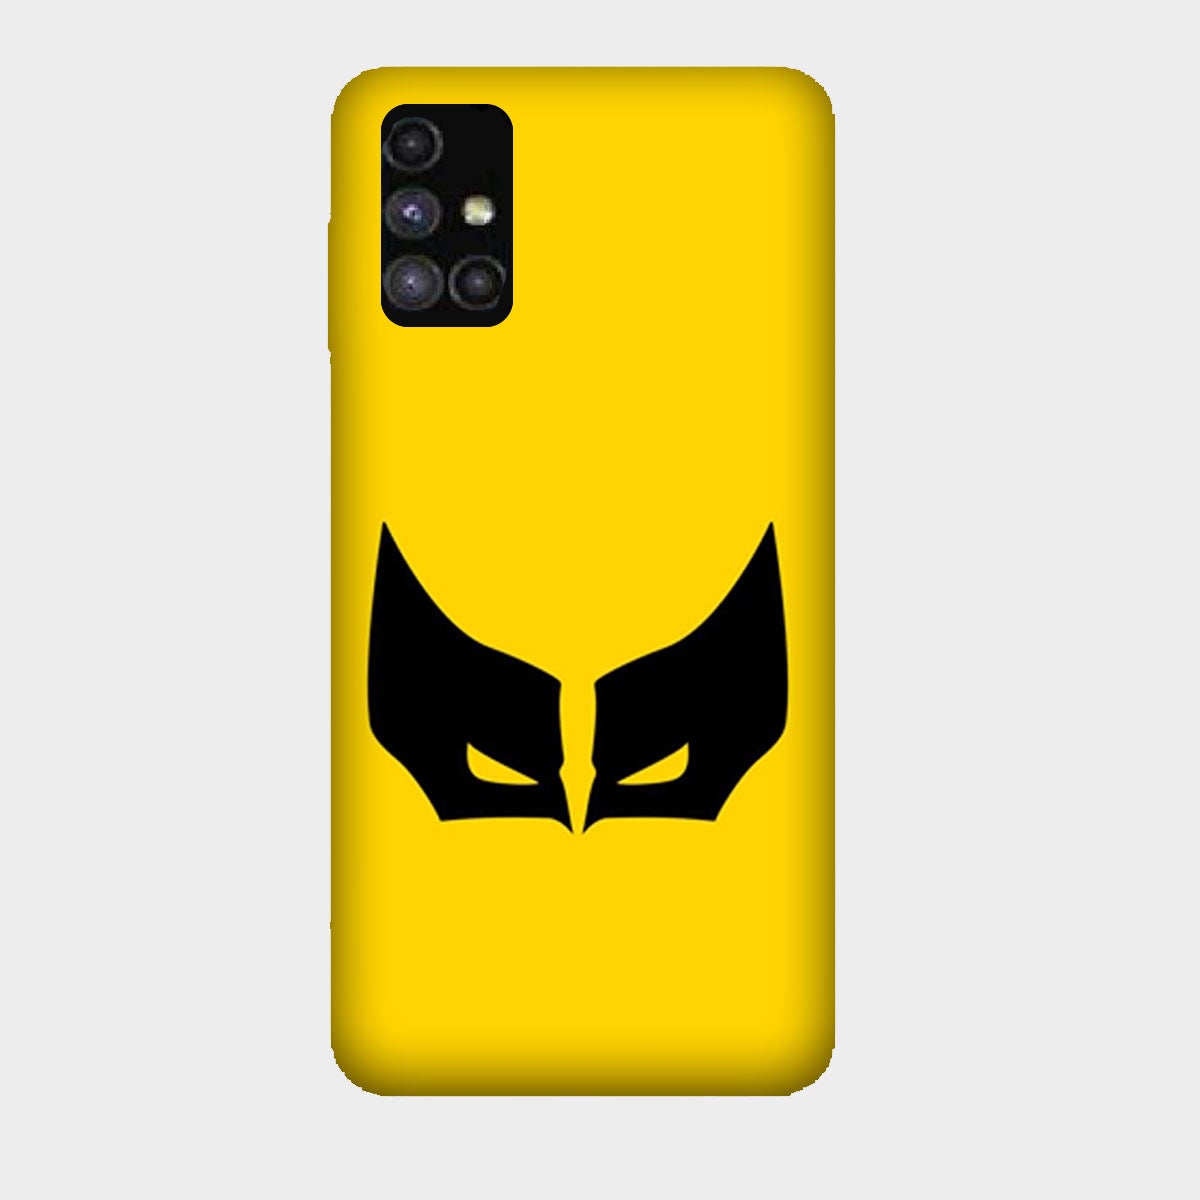 Wolverine - Yellow - Mobile Phone Cover - Hard Case - Samsung - Samsung